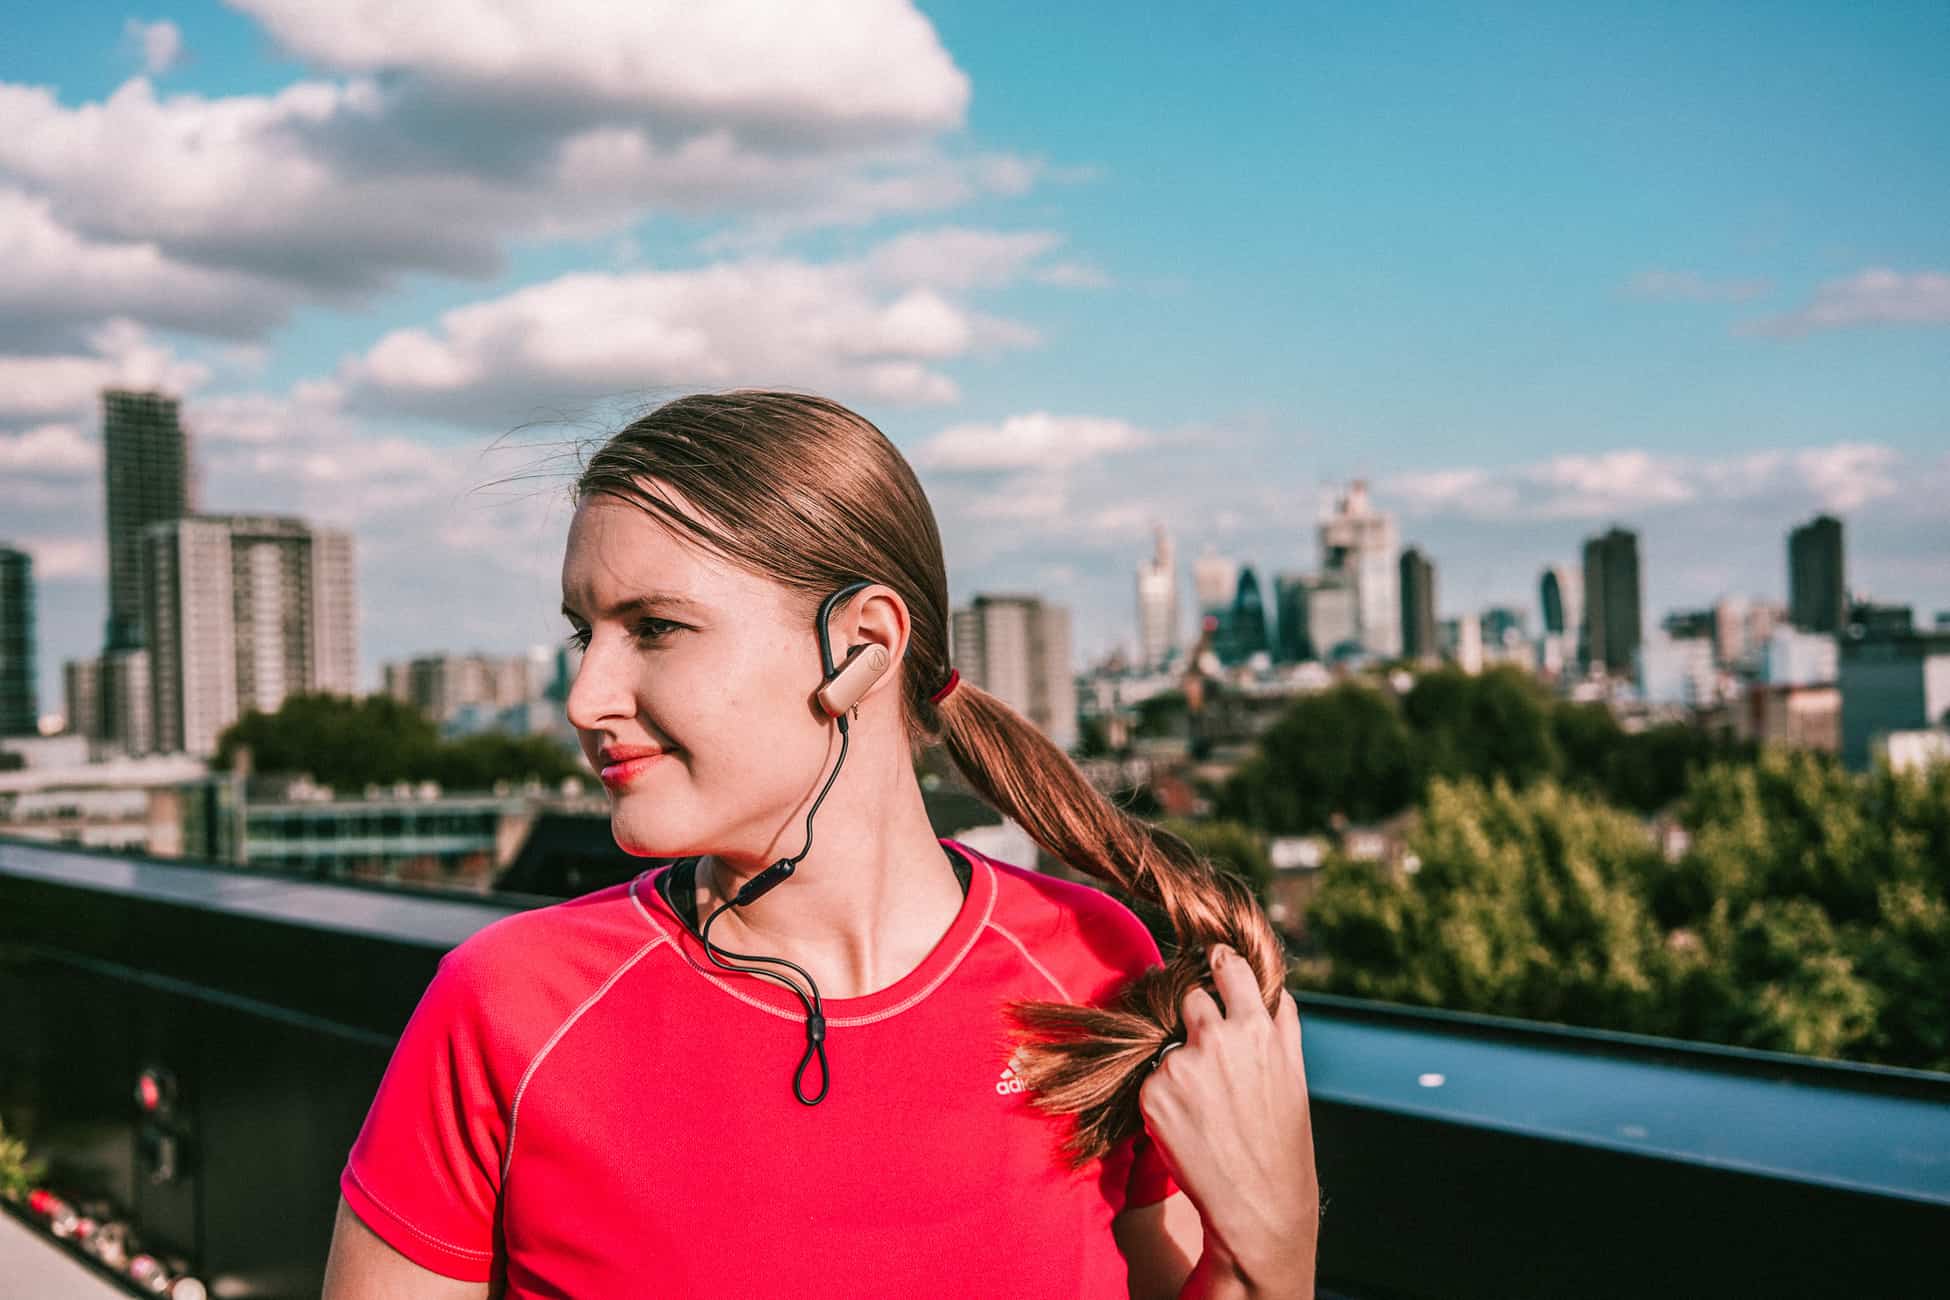 Great bluetooth headphones for hiking & travelling: Audio Technika ATH-SPORT70BT review